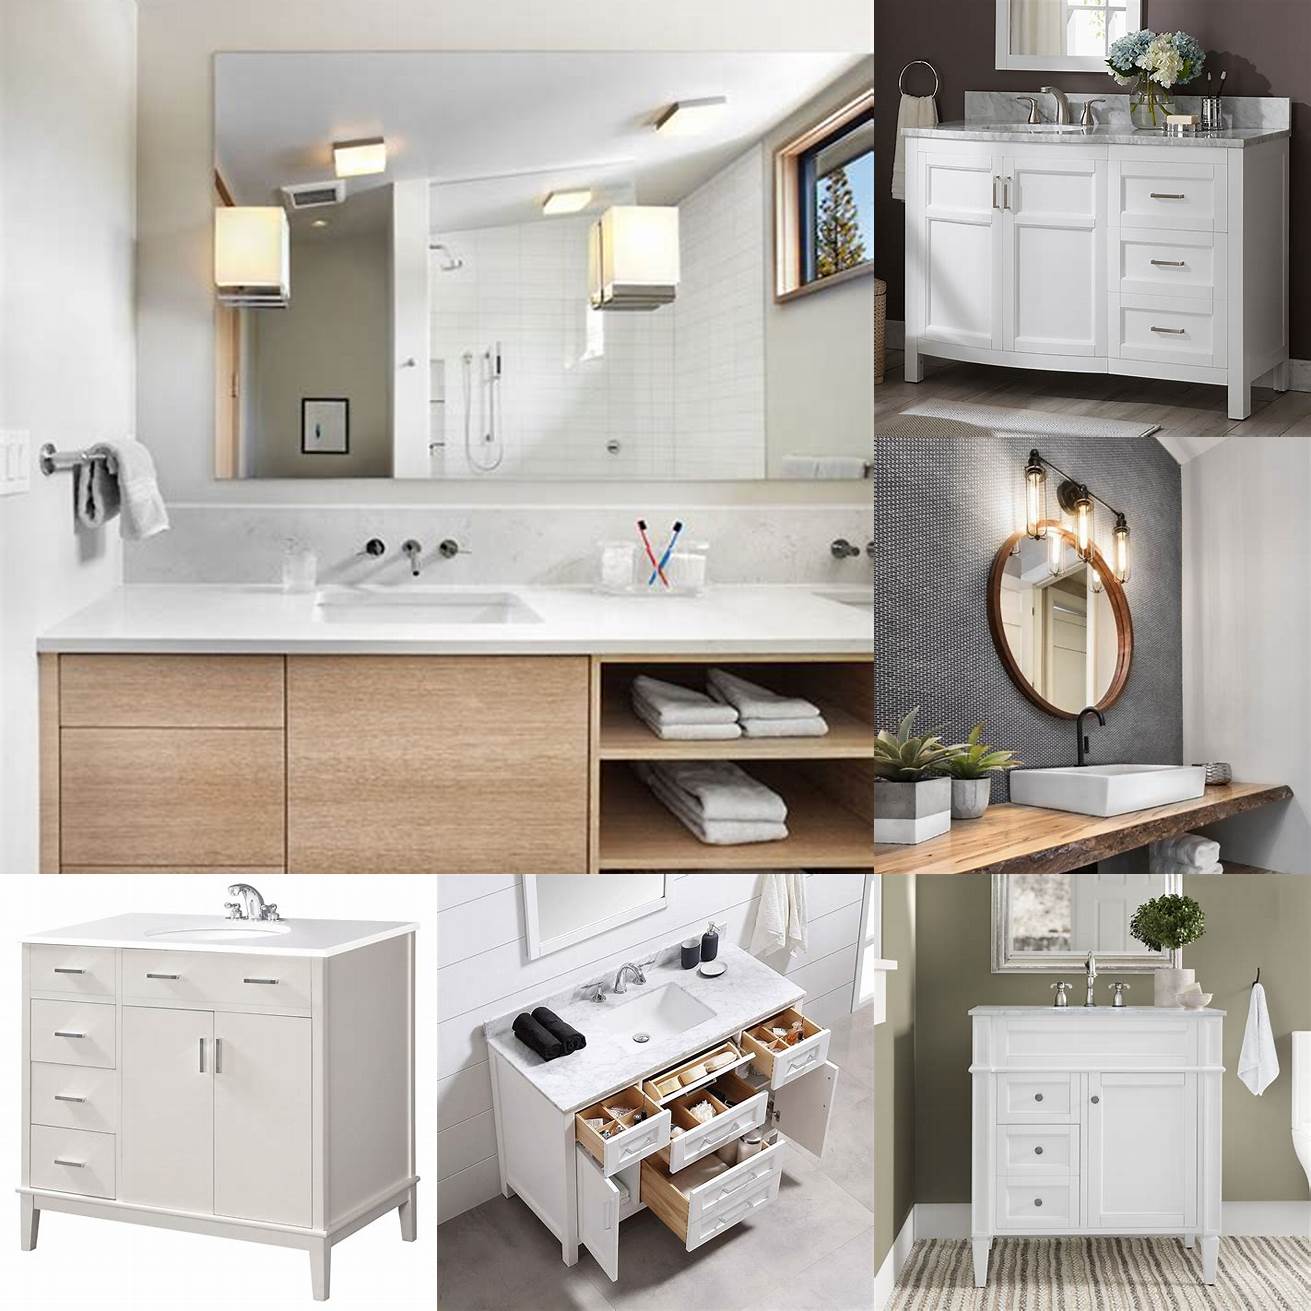 Bathroom Vanity with Drawers on Left Side and Open Shelving